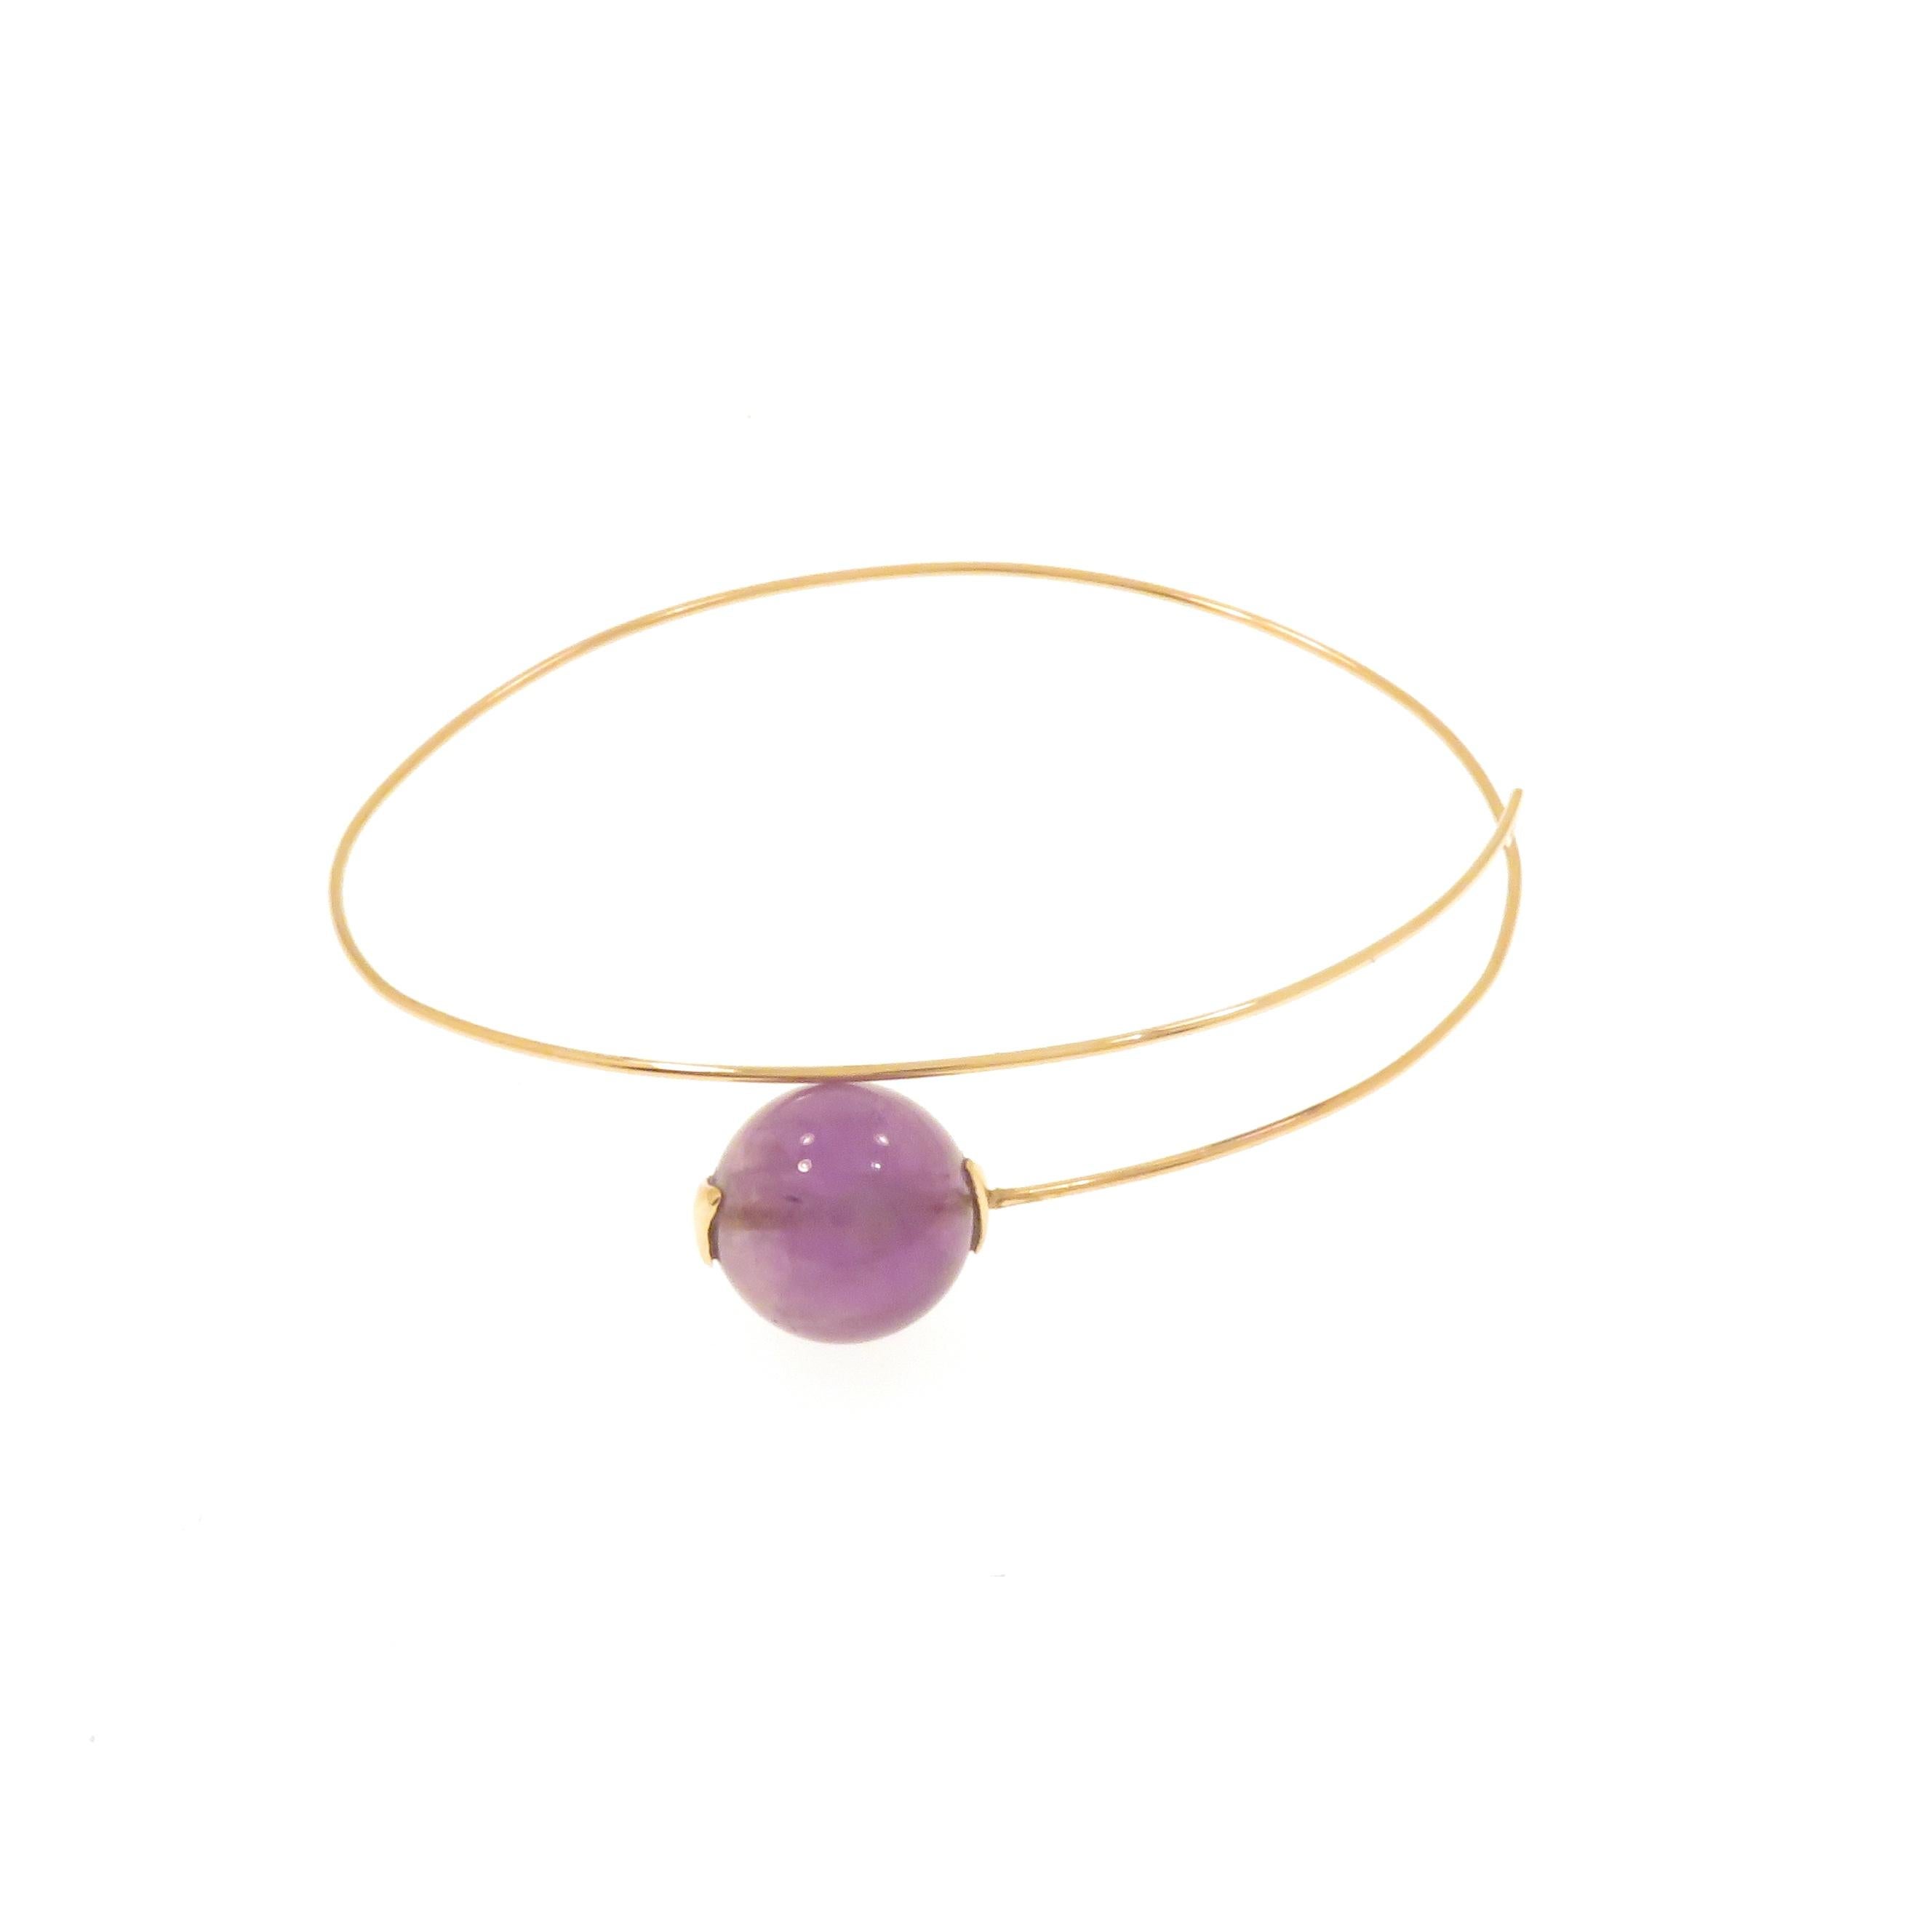 Beautiful cuff bracelet crafted in 9 karat rose gold featuring 1 bead cut amethyst. The inner size is 56x54 mm / 2.204x2.125 inches. Marked with the Italian gold mark 375 and Botta Gioielli brand mark 716MI.

Handcrafted in: 9 karat rose gold.
1